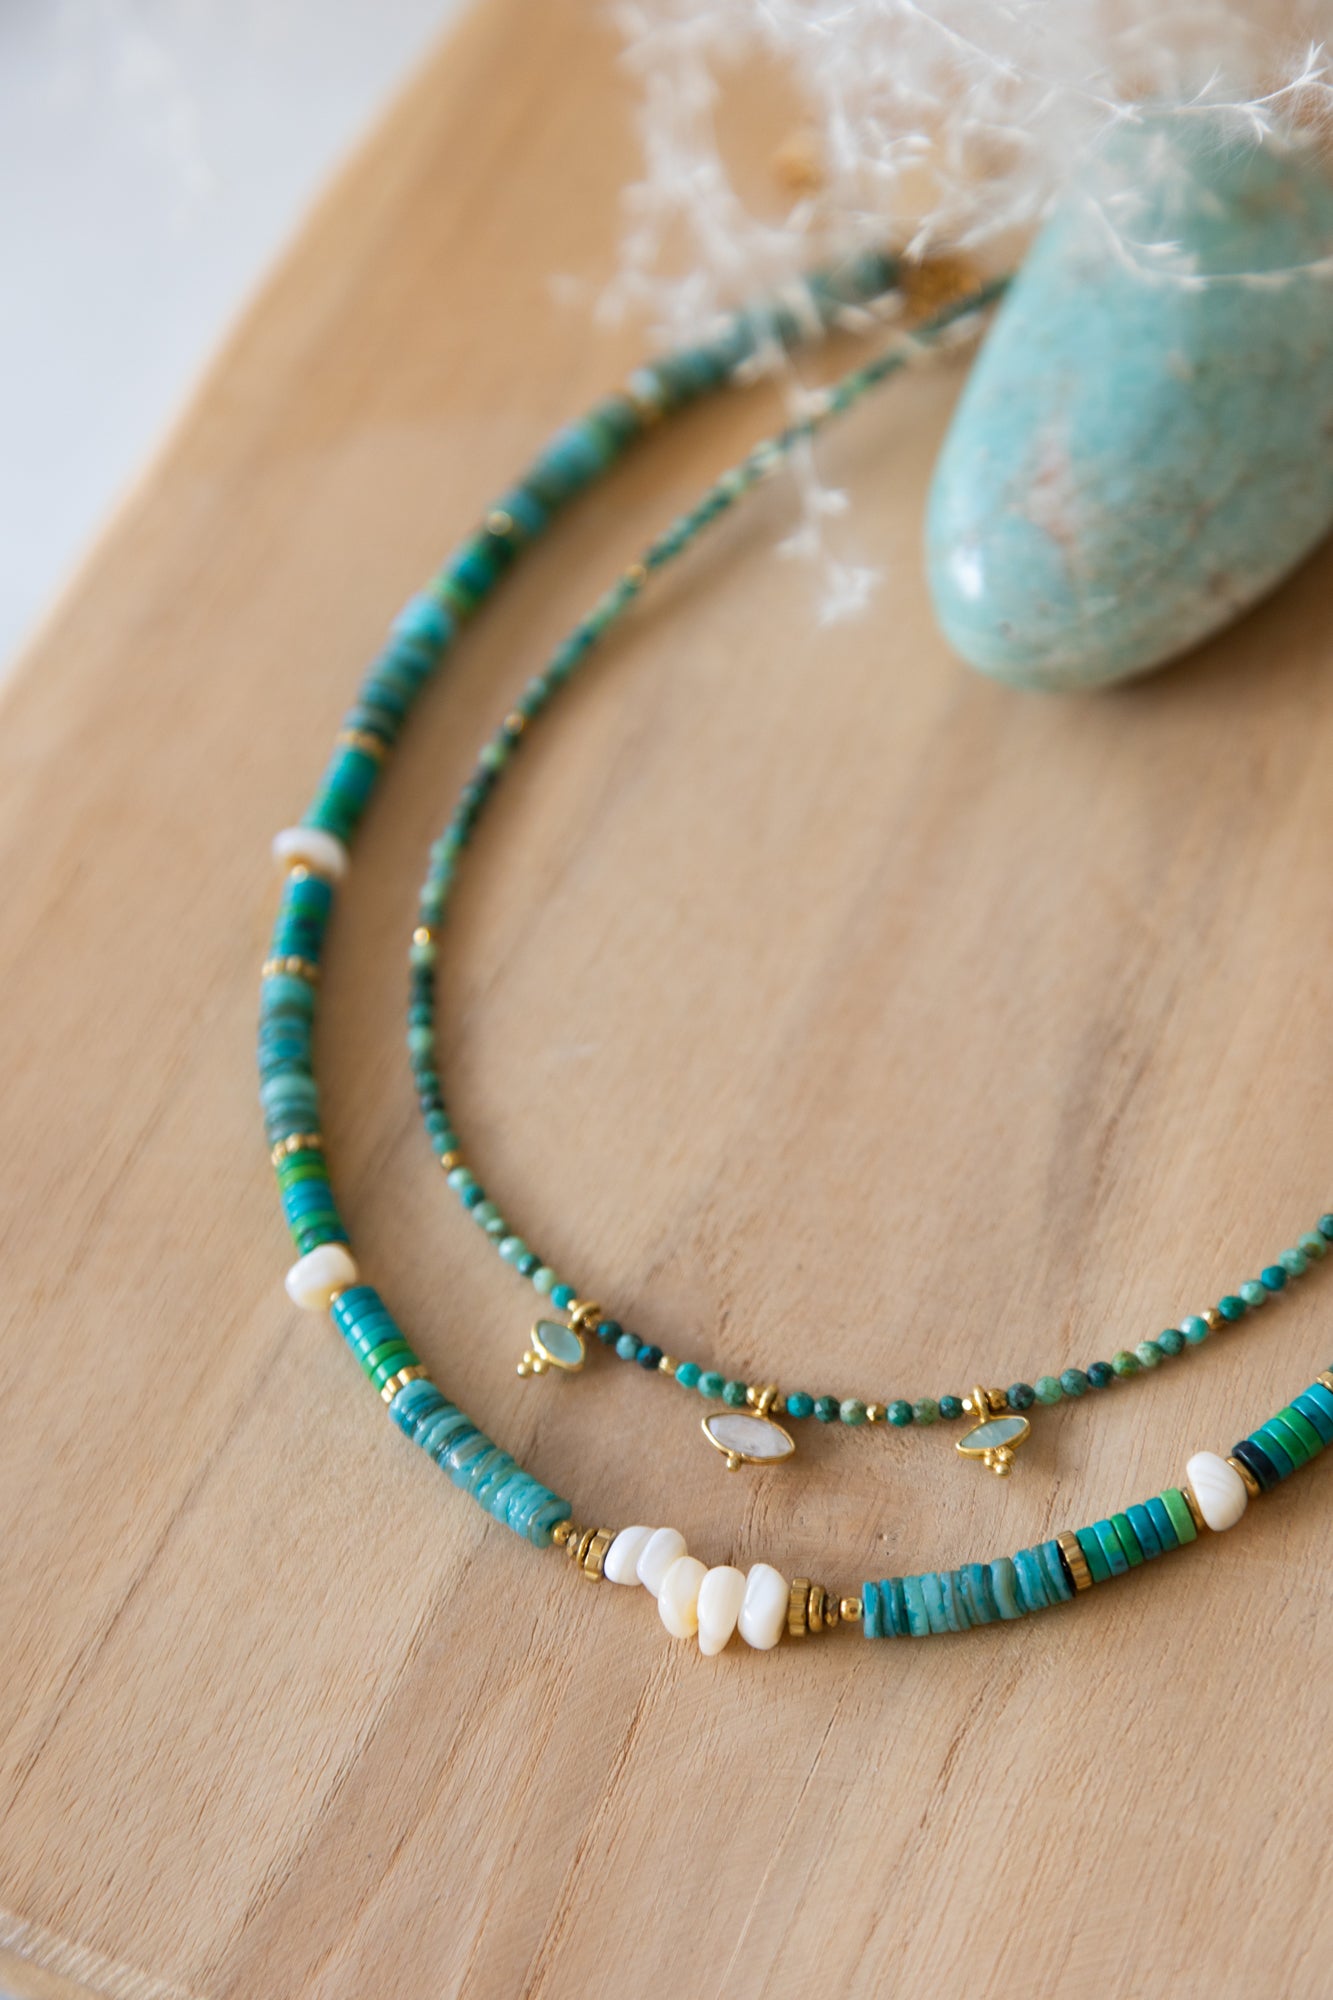 Collier surfeurs turquoise et coquillage